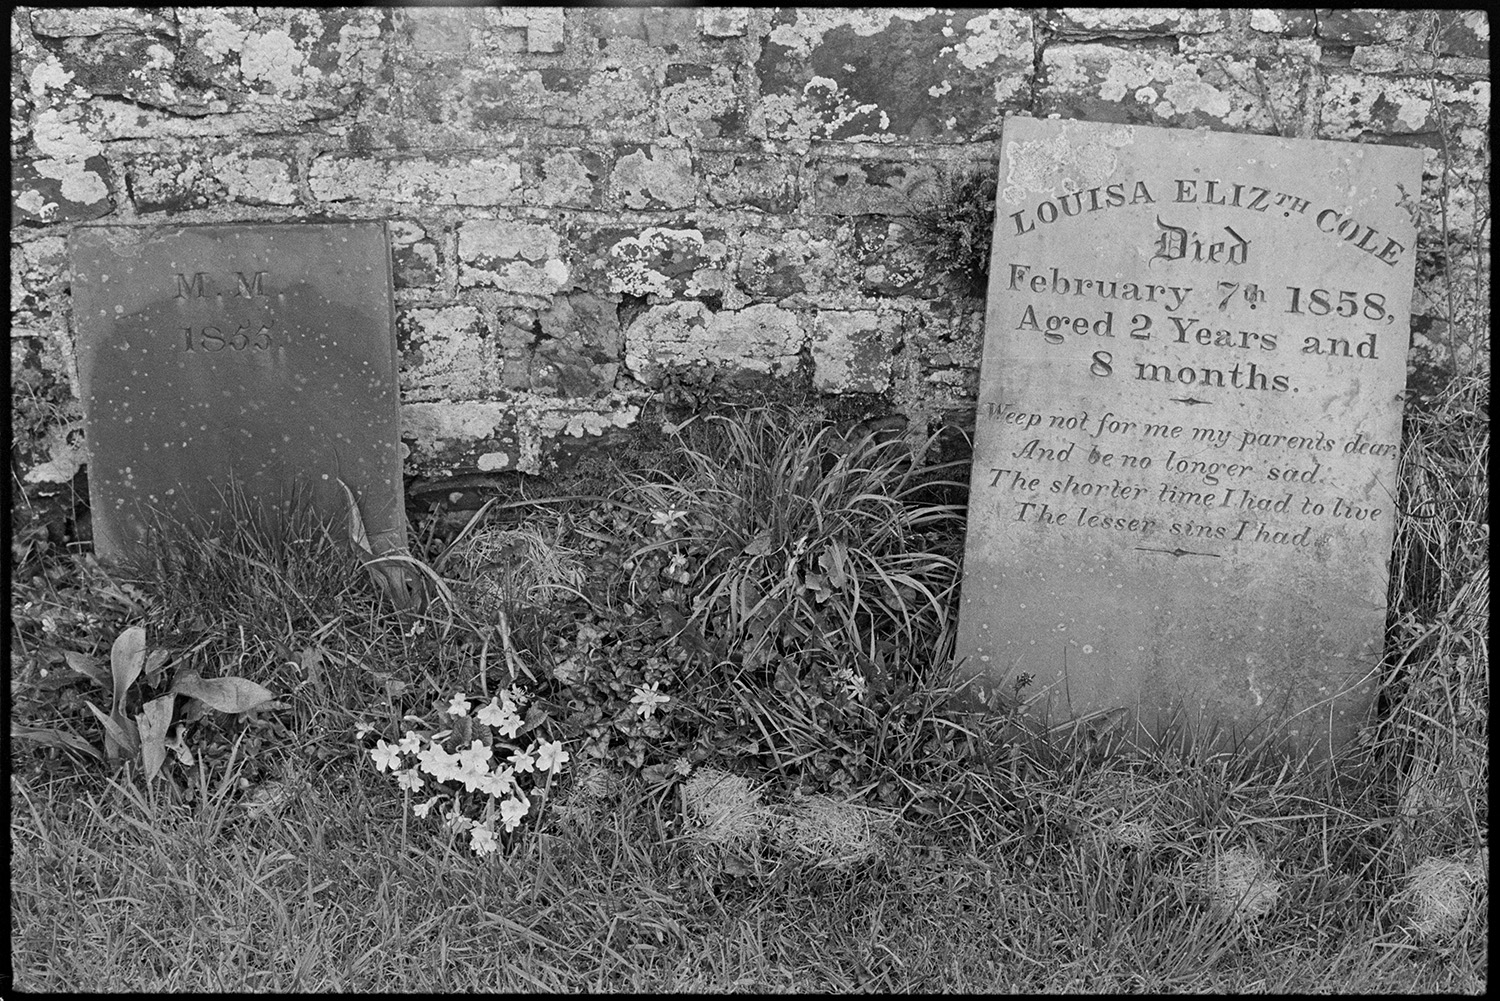 Graveyard, misty morning gravestones, child's headstone with poem and wild flowers. 
[The headstone of Louisa Elizabeth Cole by a stone wall in Burrington Churchyard. Primroses are growing by the gravestone.]